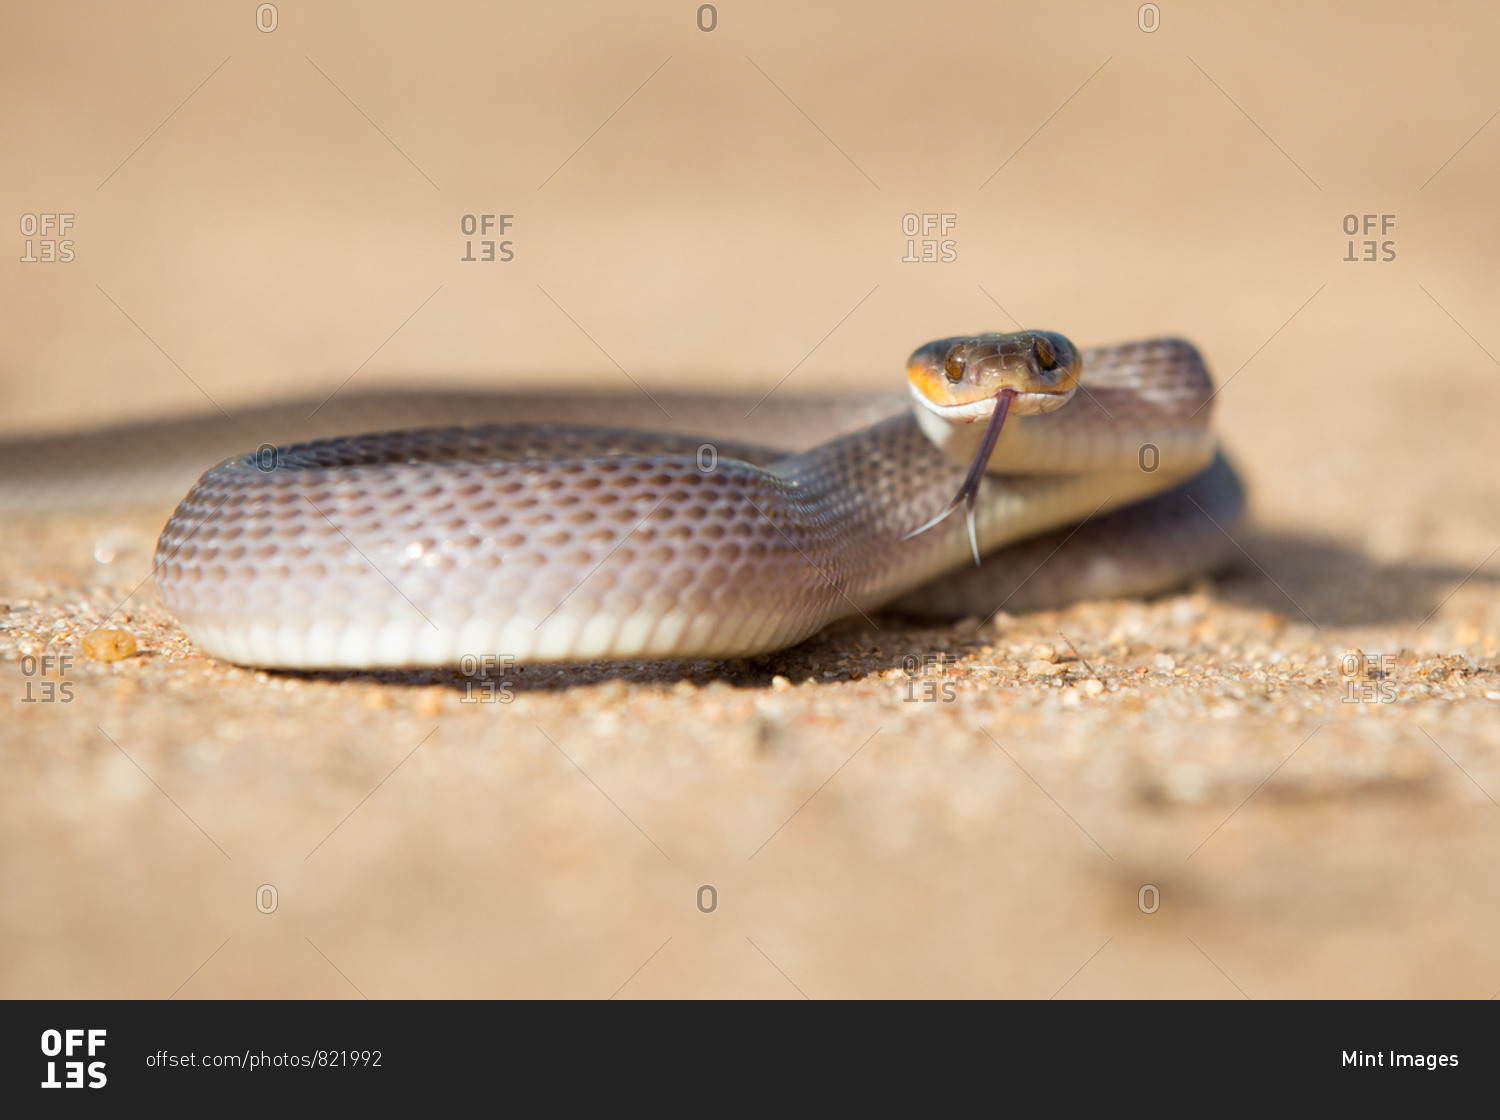 A herald snake, Crotaphopeltis hotamboeia, coils in the sand, direct gaze with tongue out